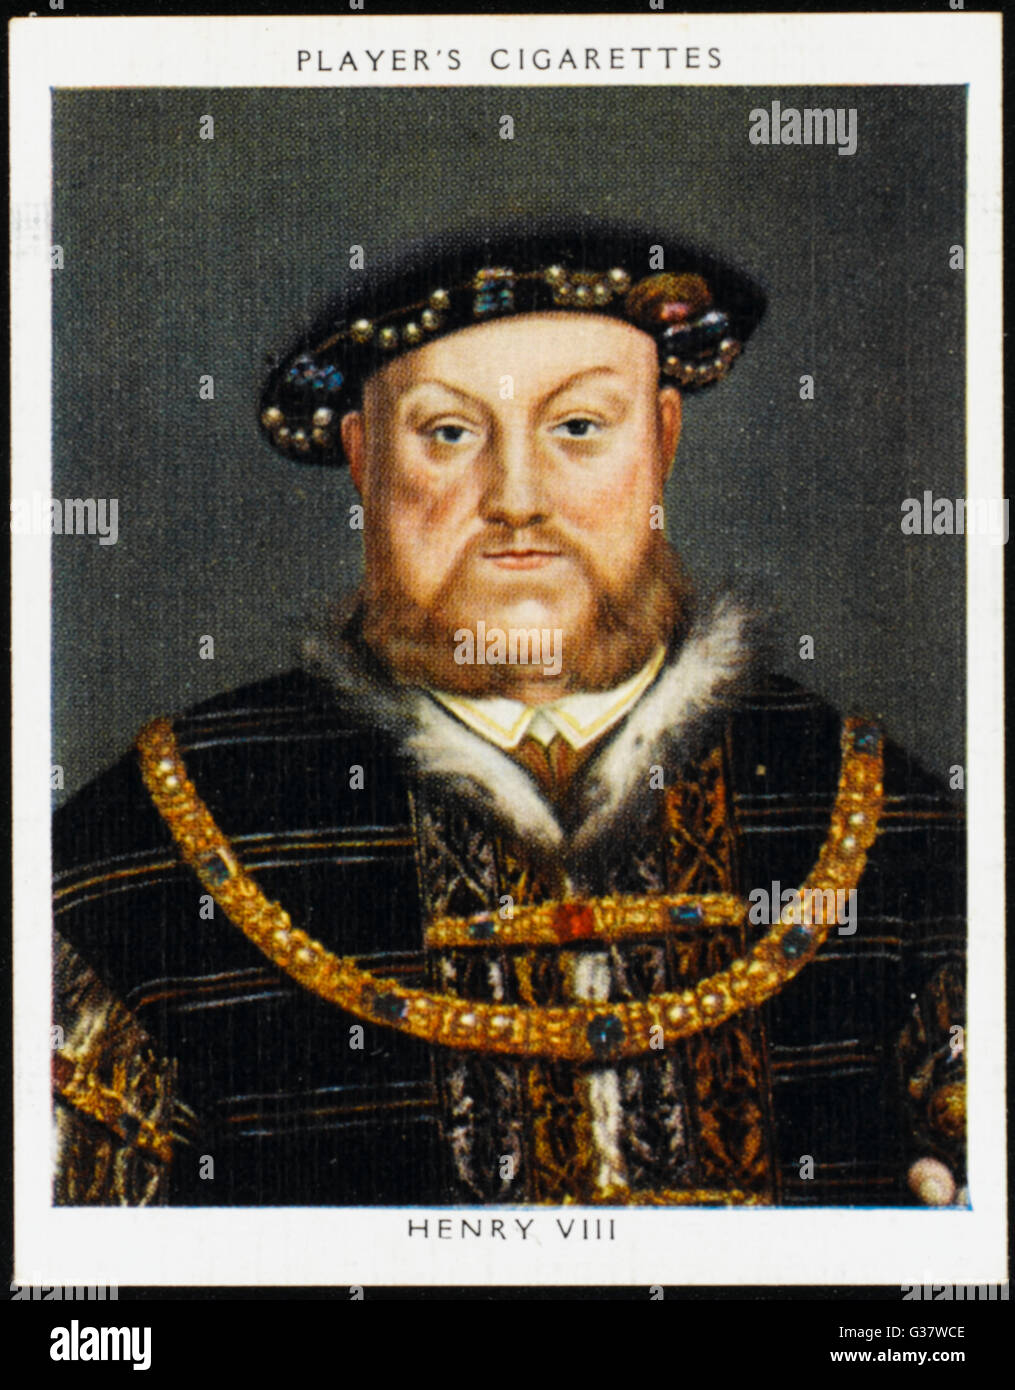 KING HENRY VIII OF ENGLAND (1491 - 1547) Reigned 1509 - 1547 Stock Photo